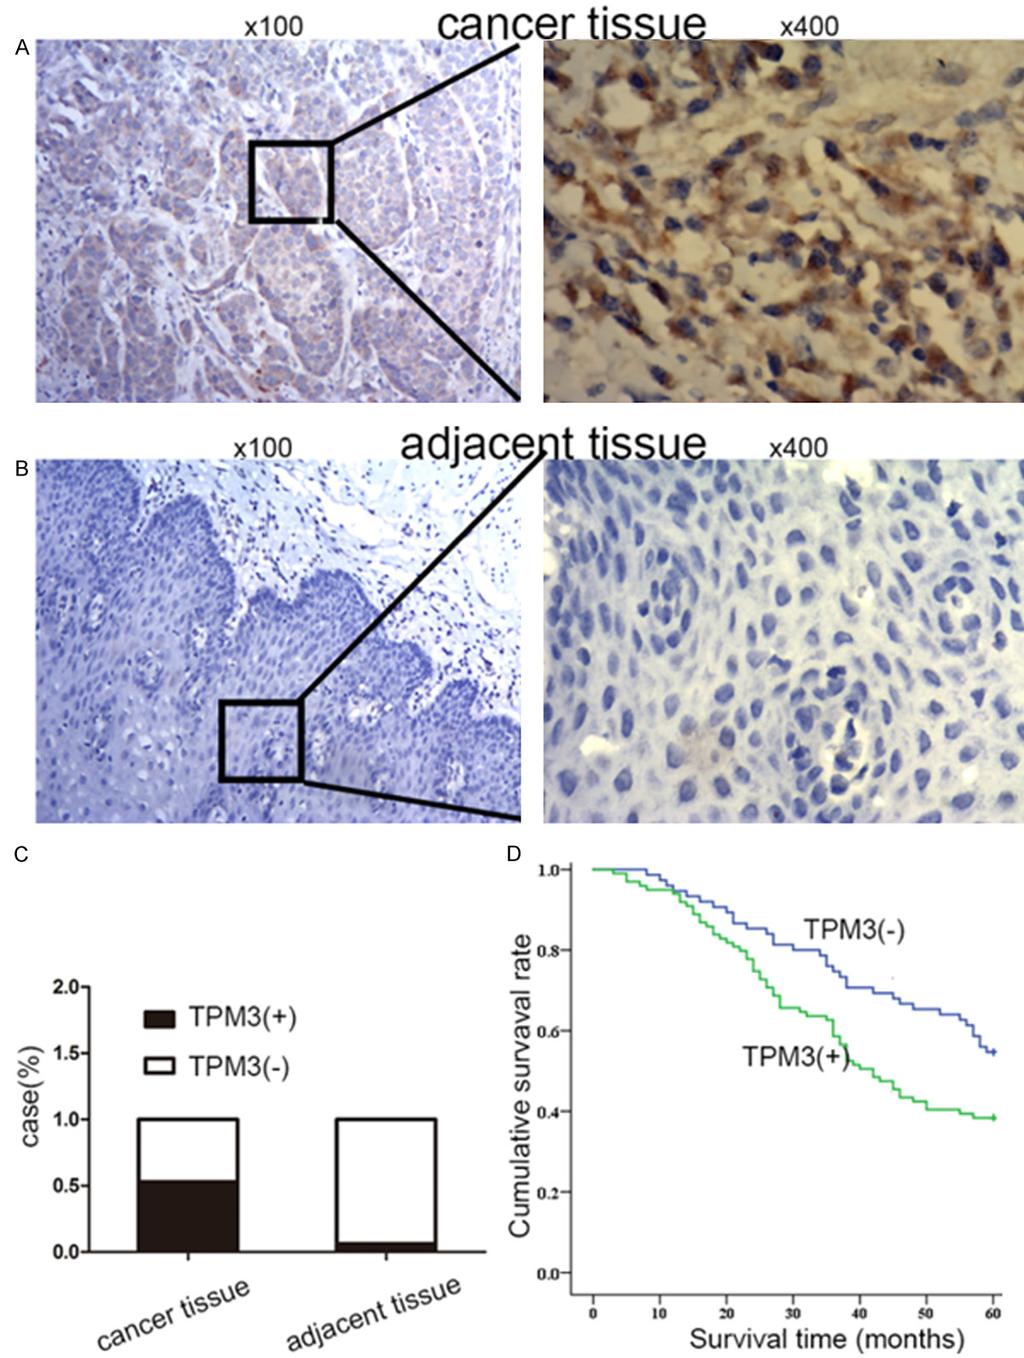 Figure 4. Analysis of TPM3 expression in esophageal cancer and adjacent tissues. A. Higher expression of TPM3 was observed with brown cytoplasm in the cancer tissue. B.